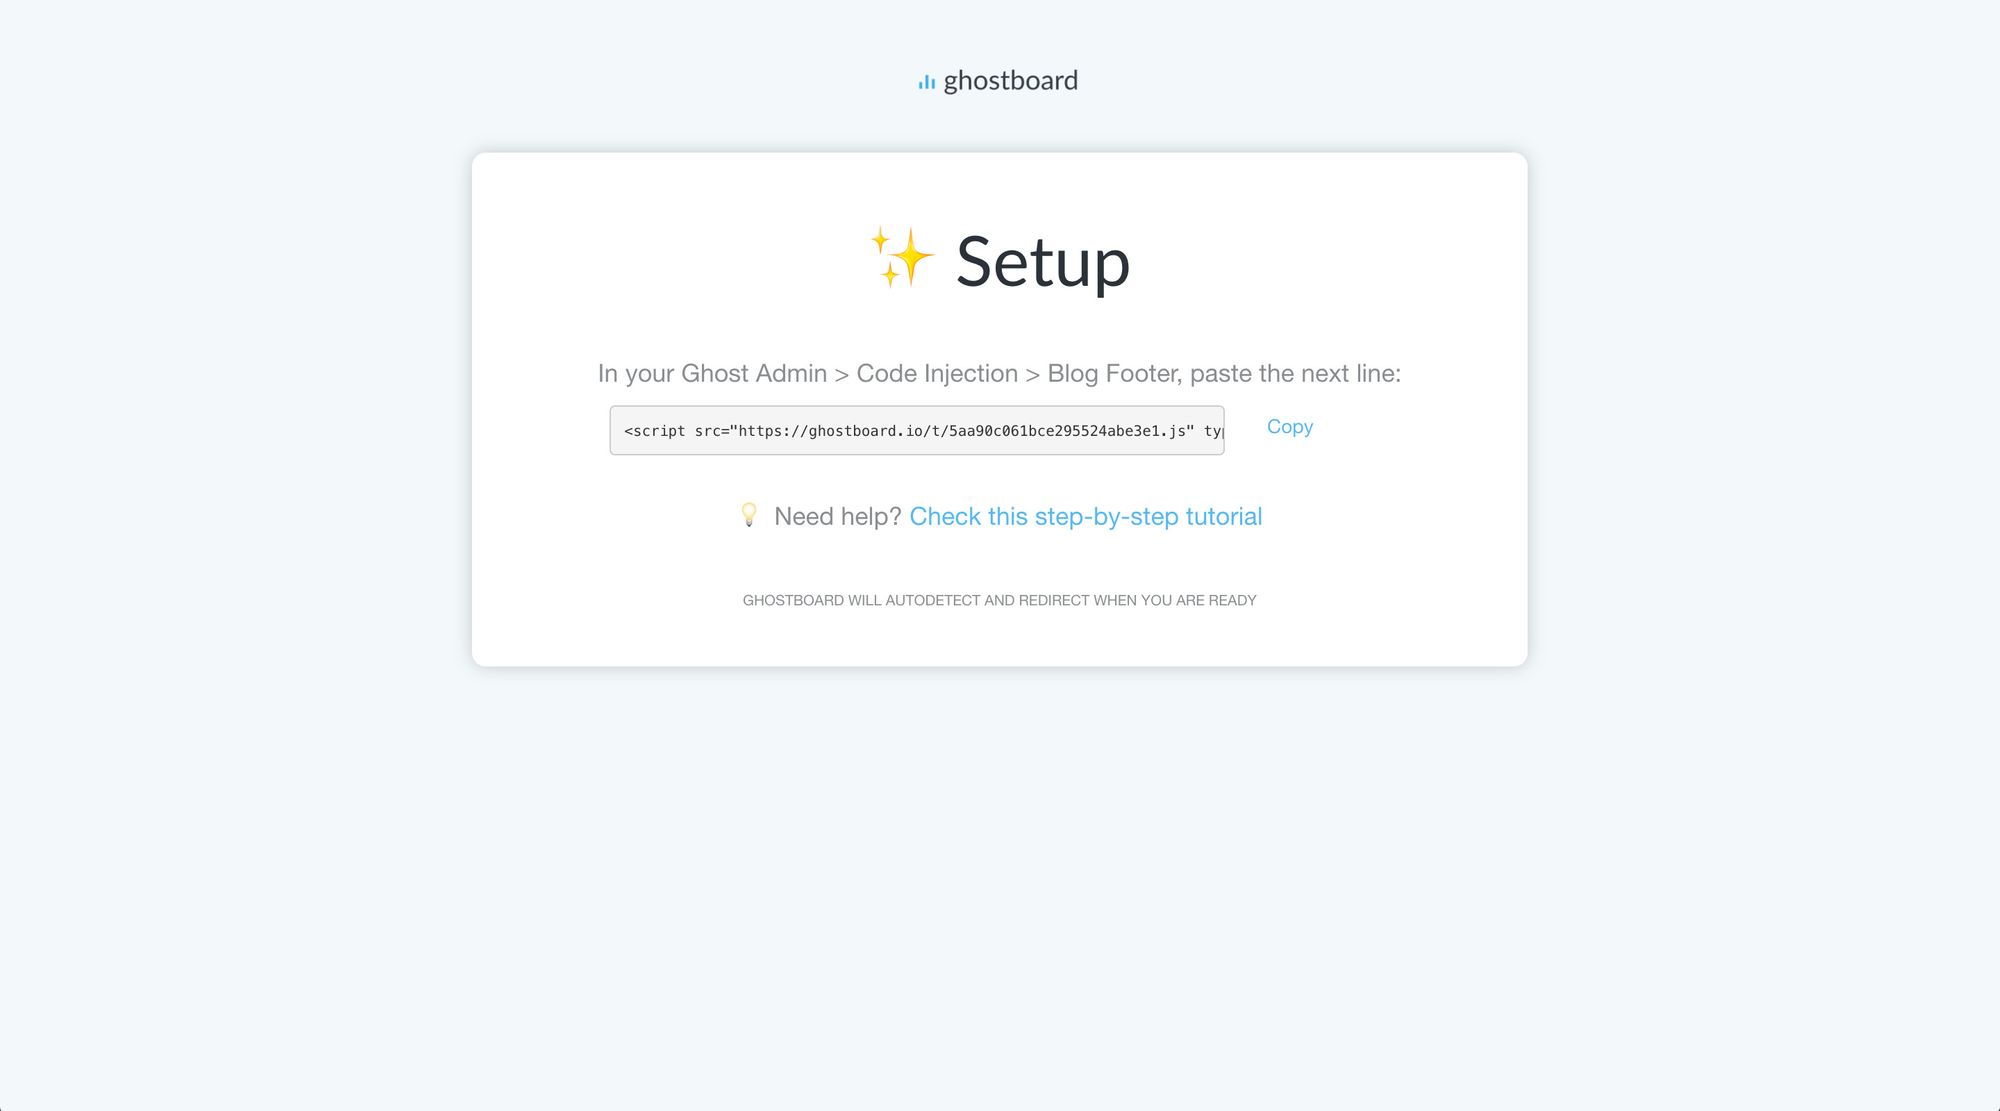 How to setup Ghostboard